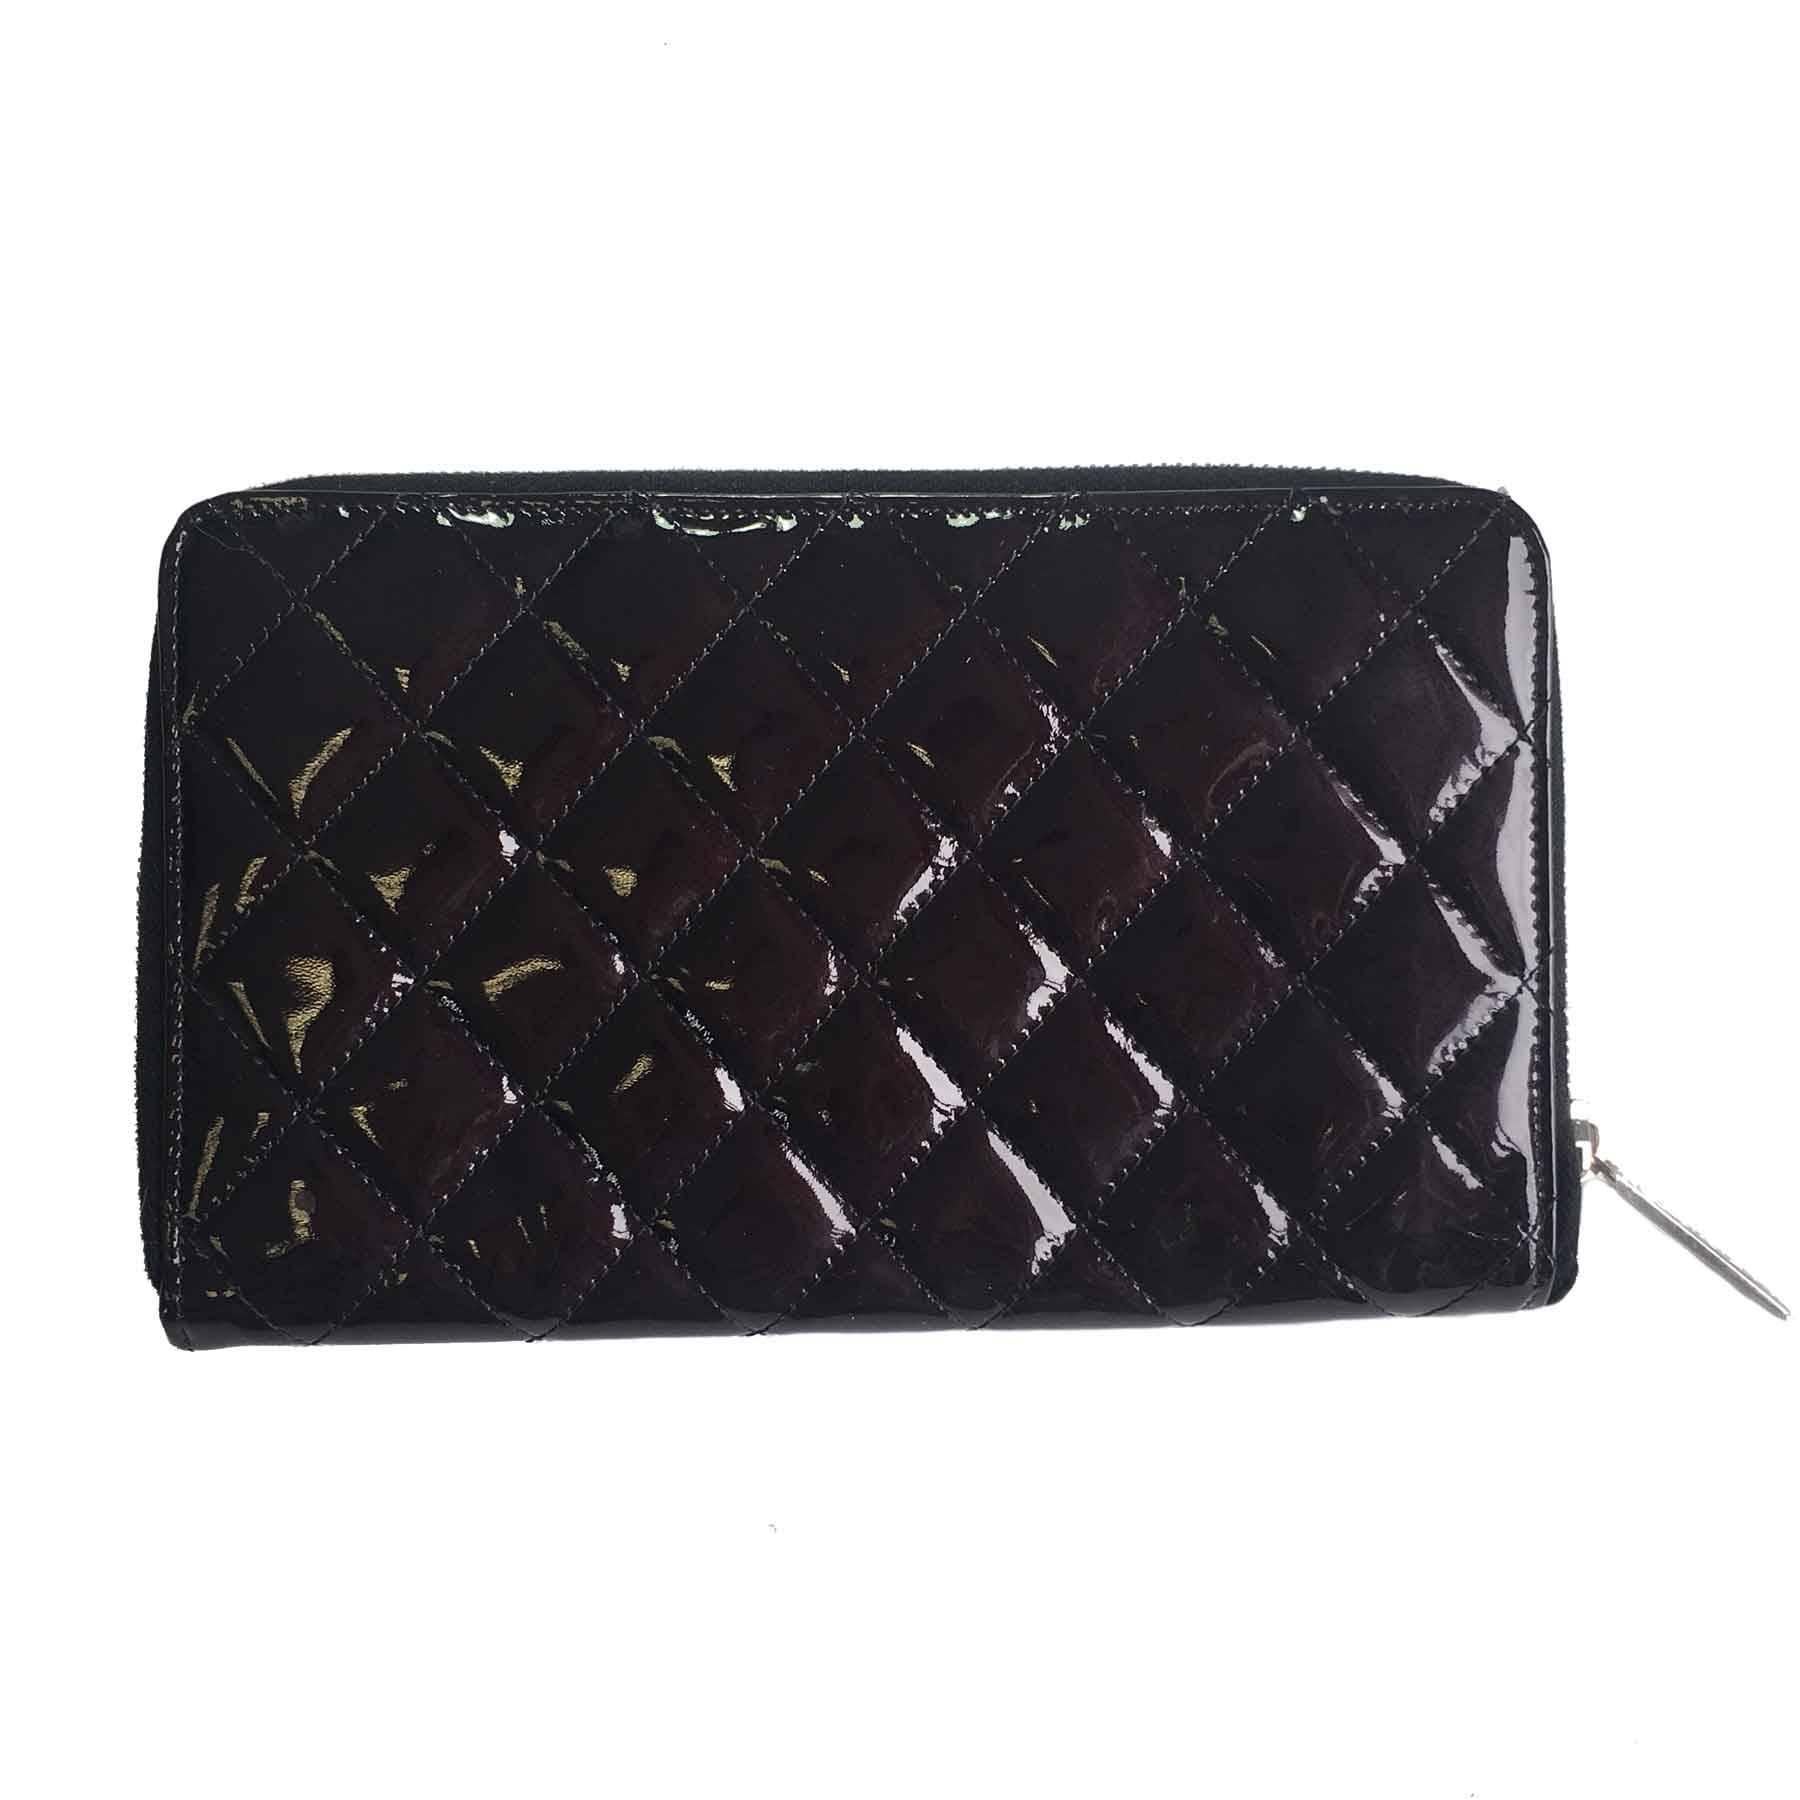 Chanel zipped wallet in quilted black patent leather. CC in silver plated metal. Black leather interior. S of the Private Sales inscribed inside a pocket.

Inside: 16 card slots, 4 bill slots and a zipped pocket.

Delivered in a dust bag Valois